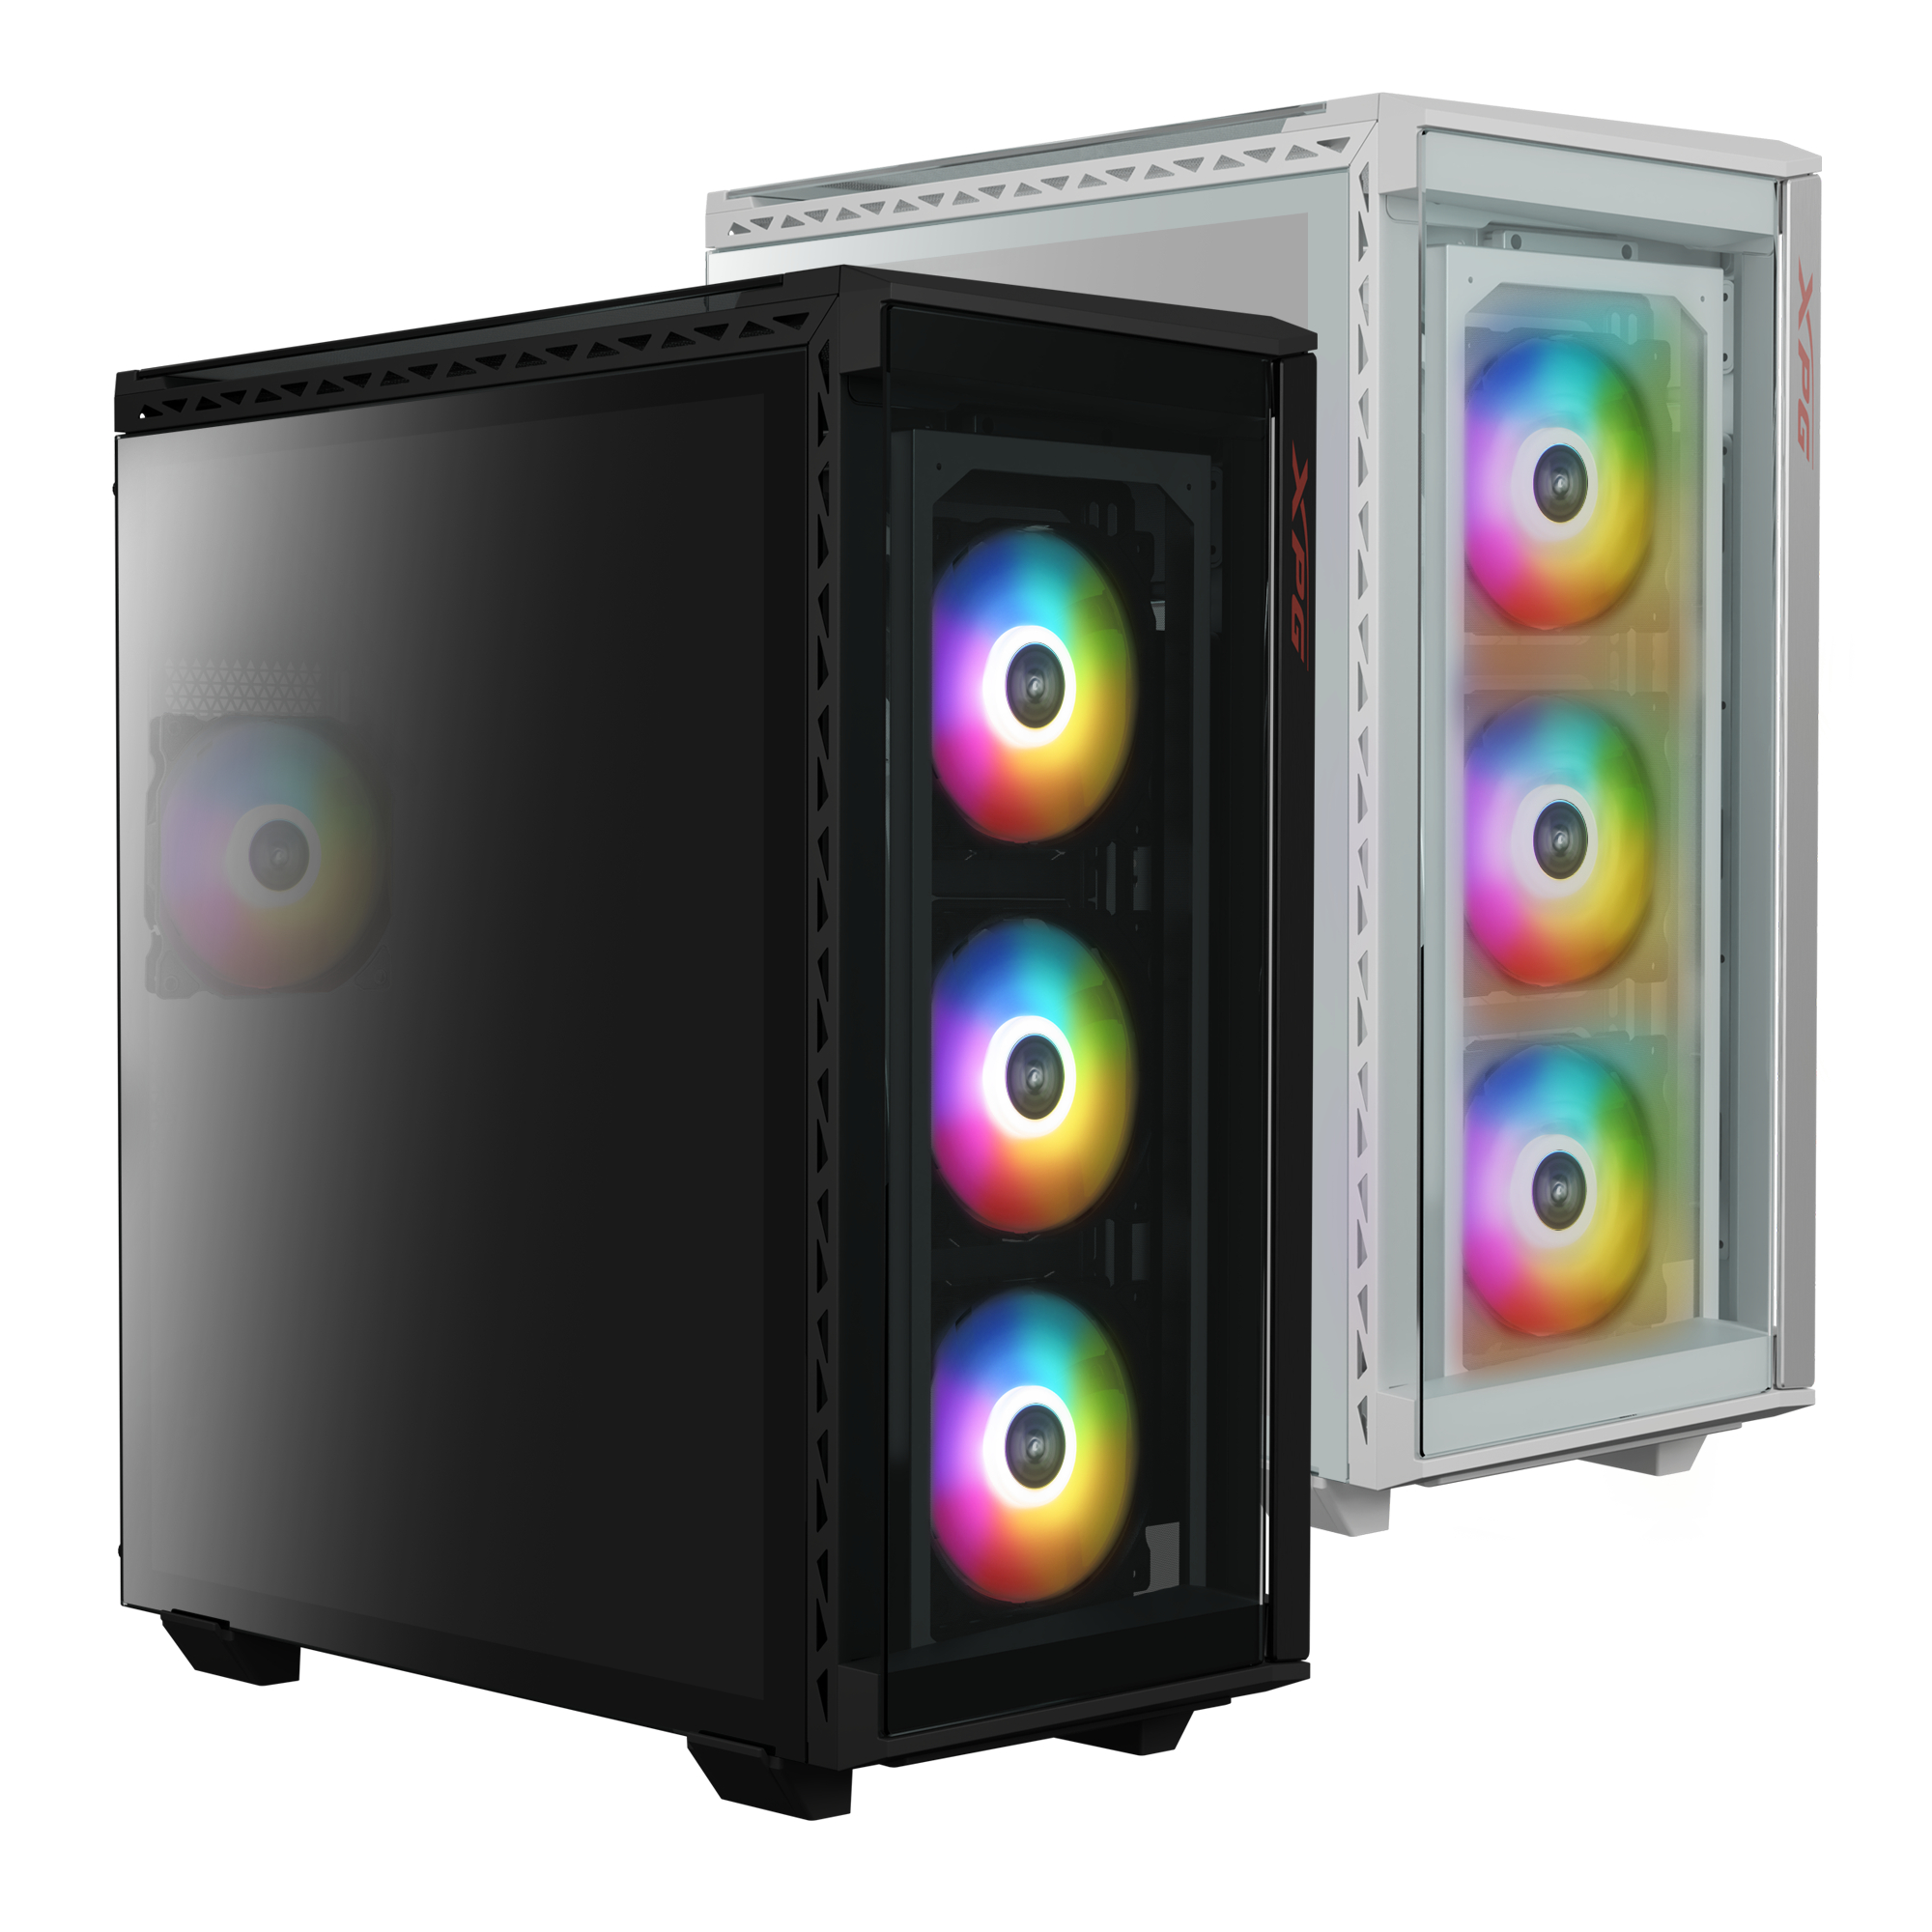 Super Mid-Tower PC Chassis